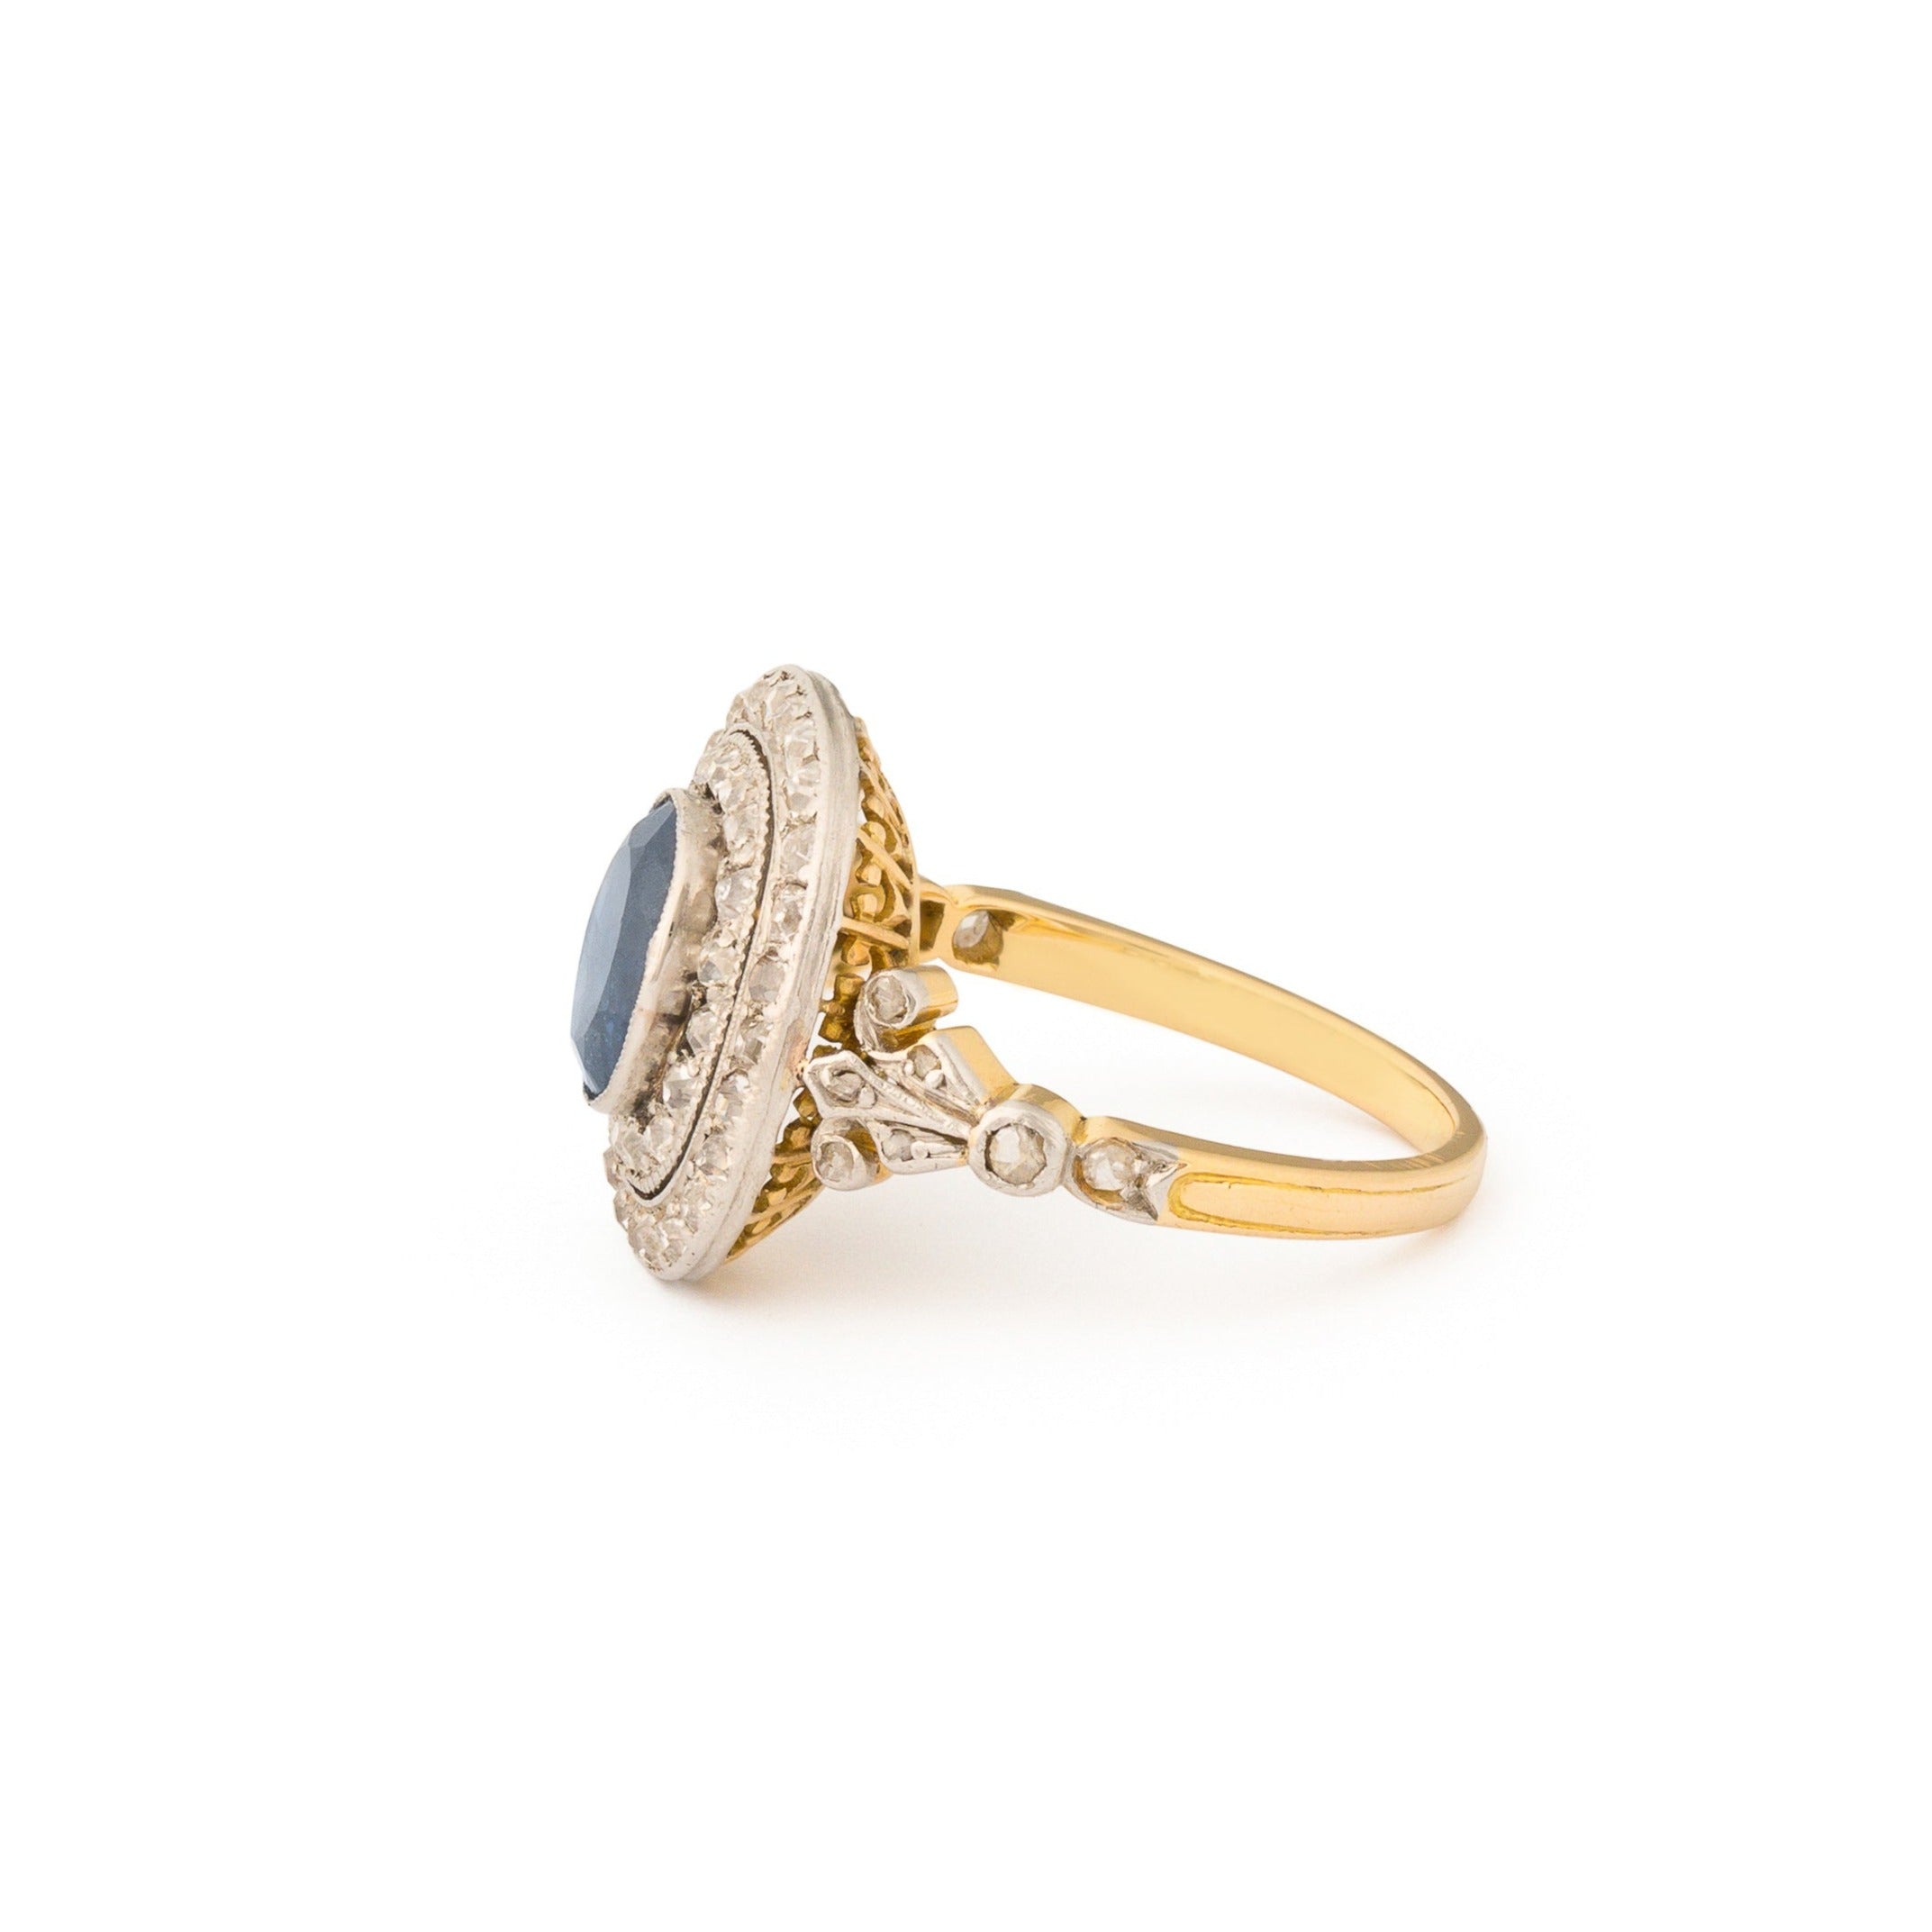 Edwardian Sapphire, Diamond, and Platinum-topped 18k Gold Ring